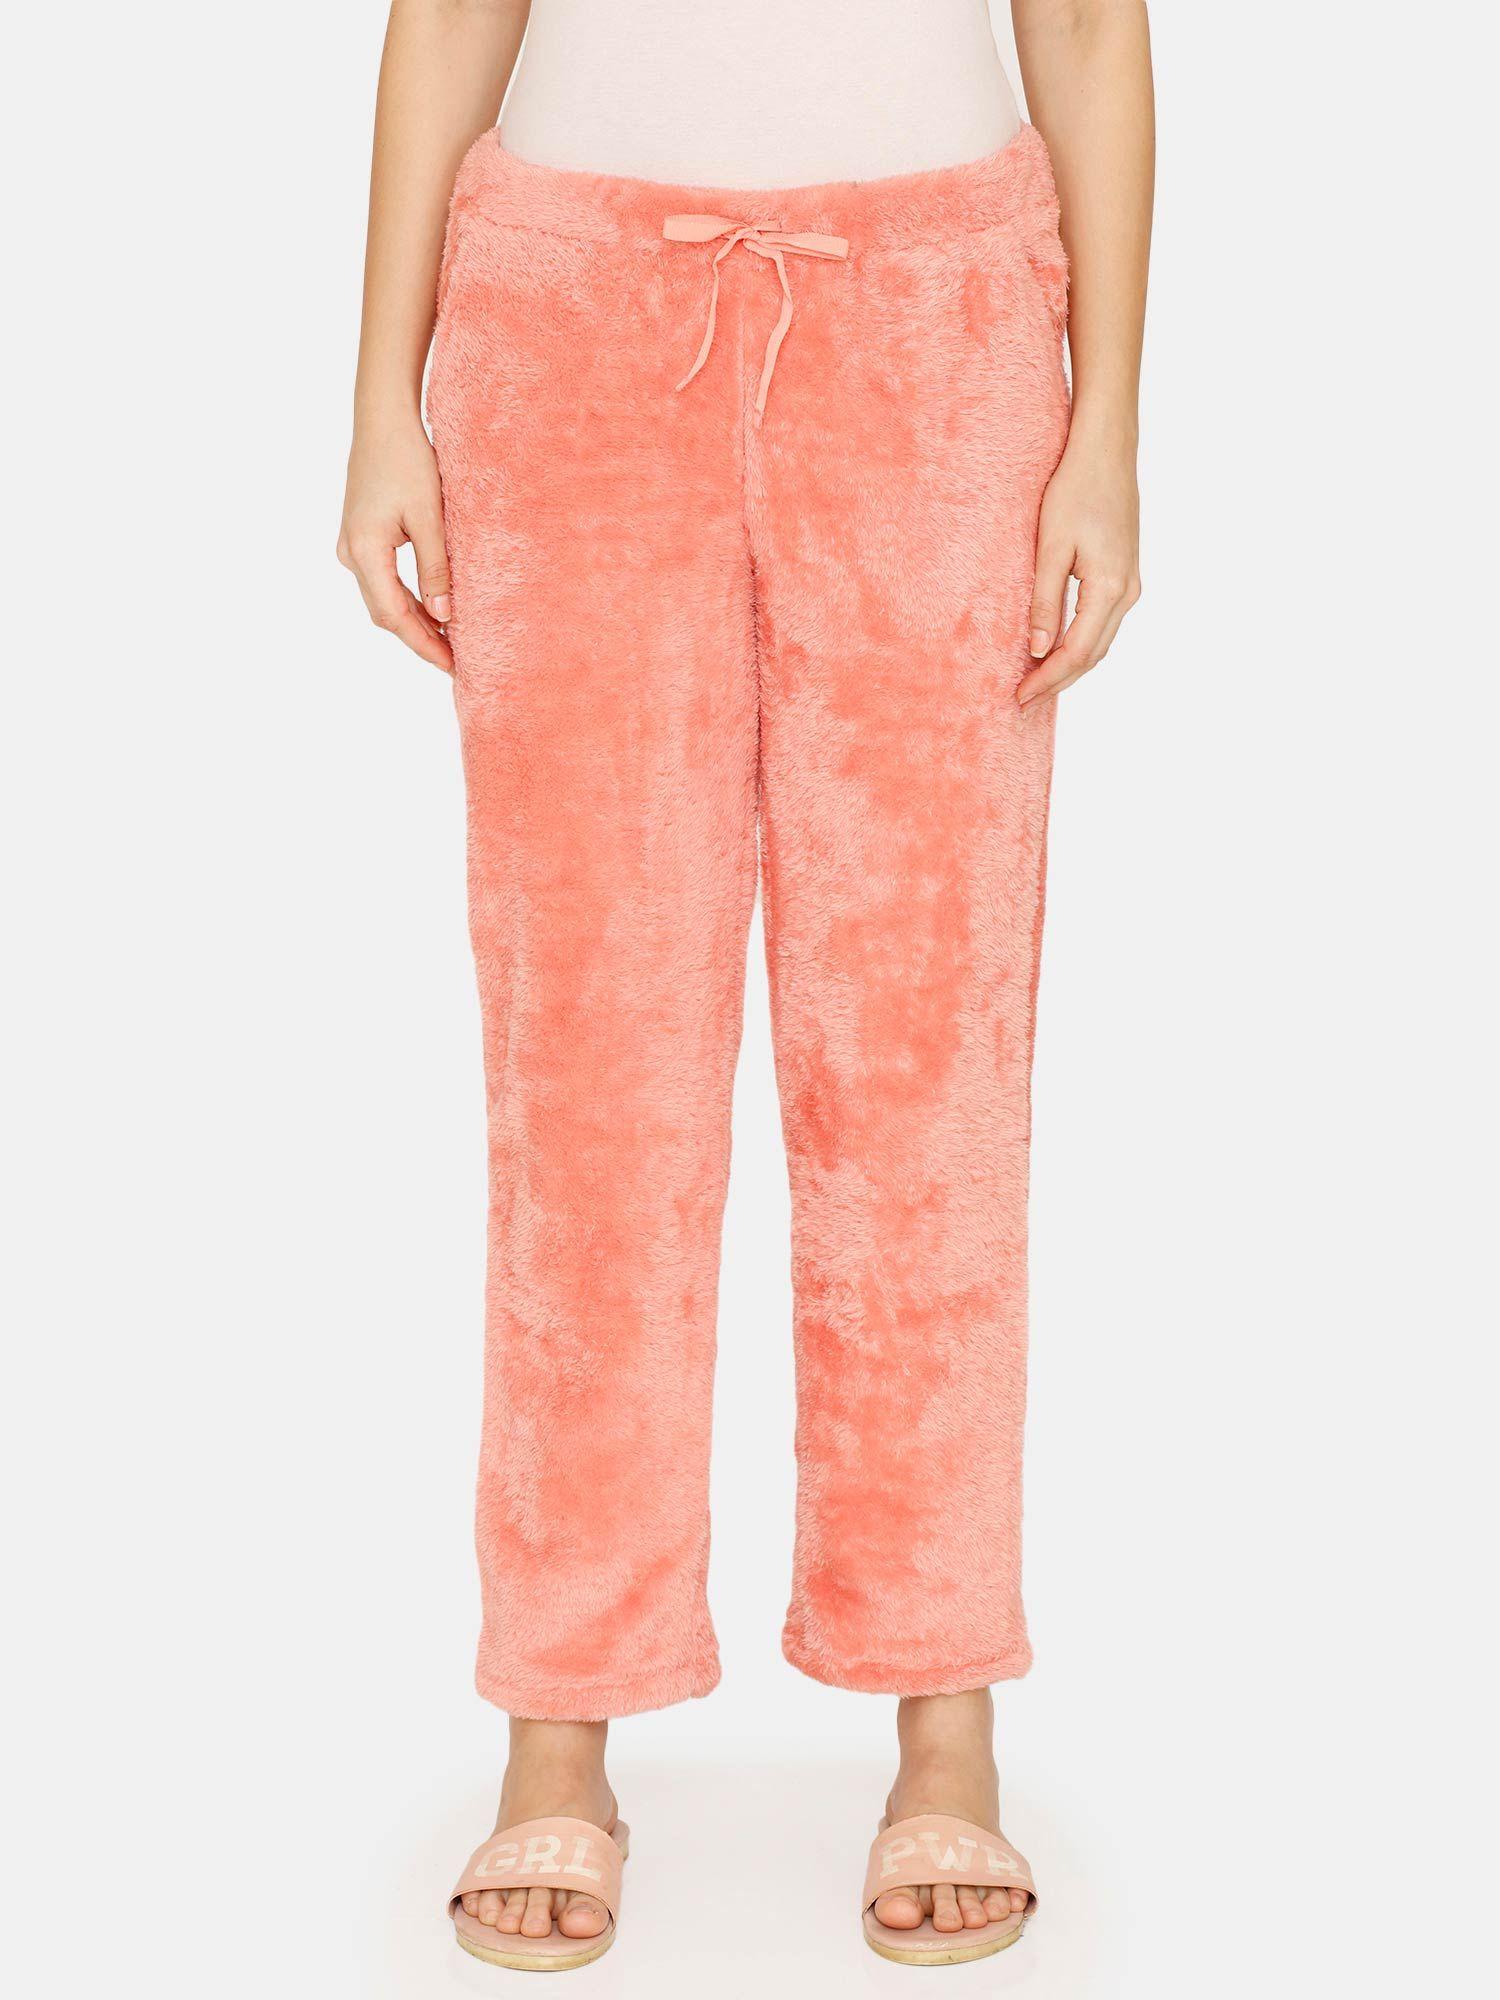 fuzzy dreams fur knit poly lounge pants - lobster bisque